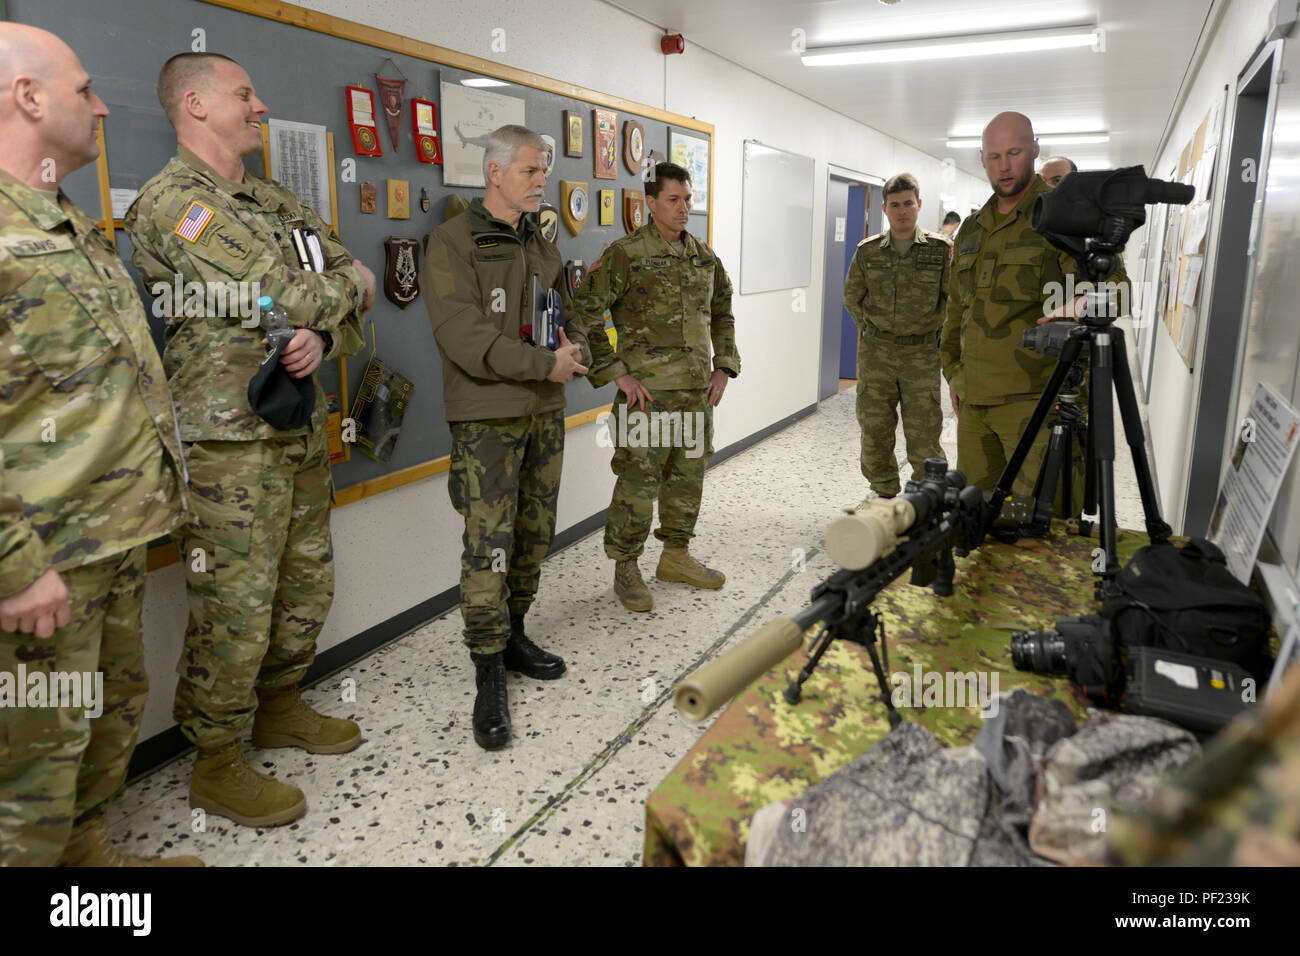 Czech Republic Army Gen. Petr Pavel, chairman of the NATO Military Committee is hosted by the staff of the International Special Training Centre for a tour of the multinational training facility located on Staufer Kaserne, Pfullendorf, Germany, Feb. 25, 2016. (U.S. Army photo by Visual Information Specialist Jason Johnston/Released) Stock Photo